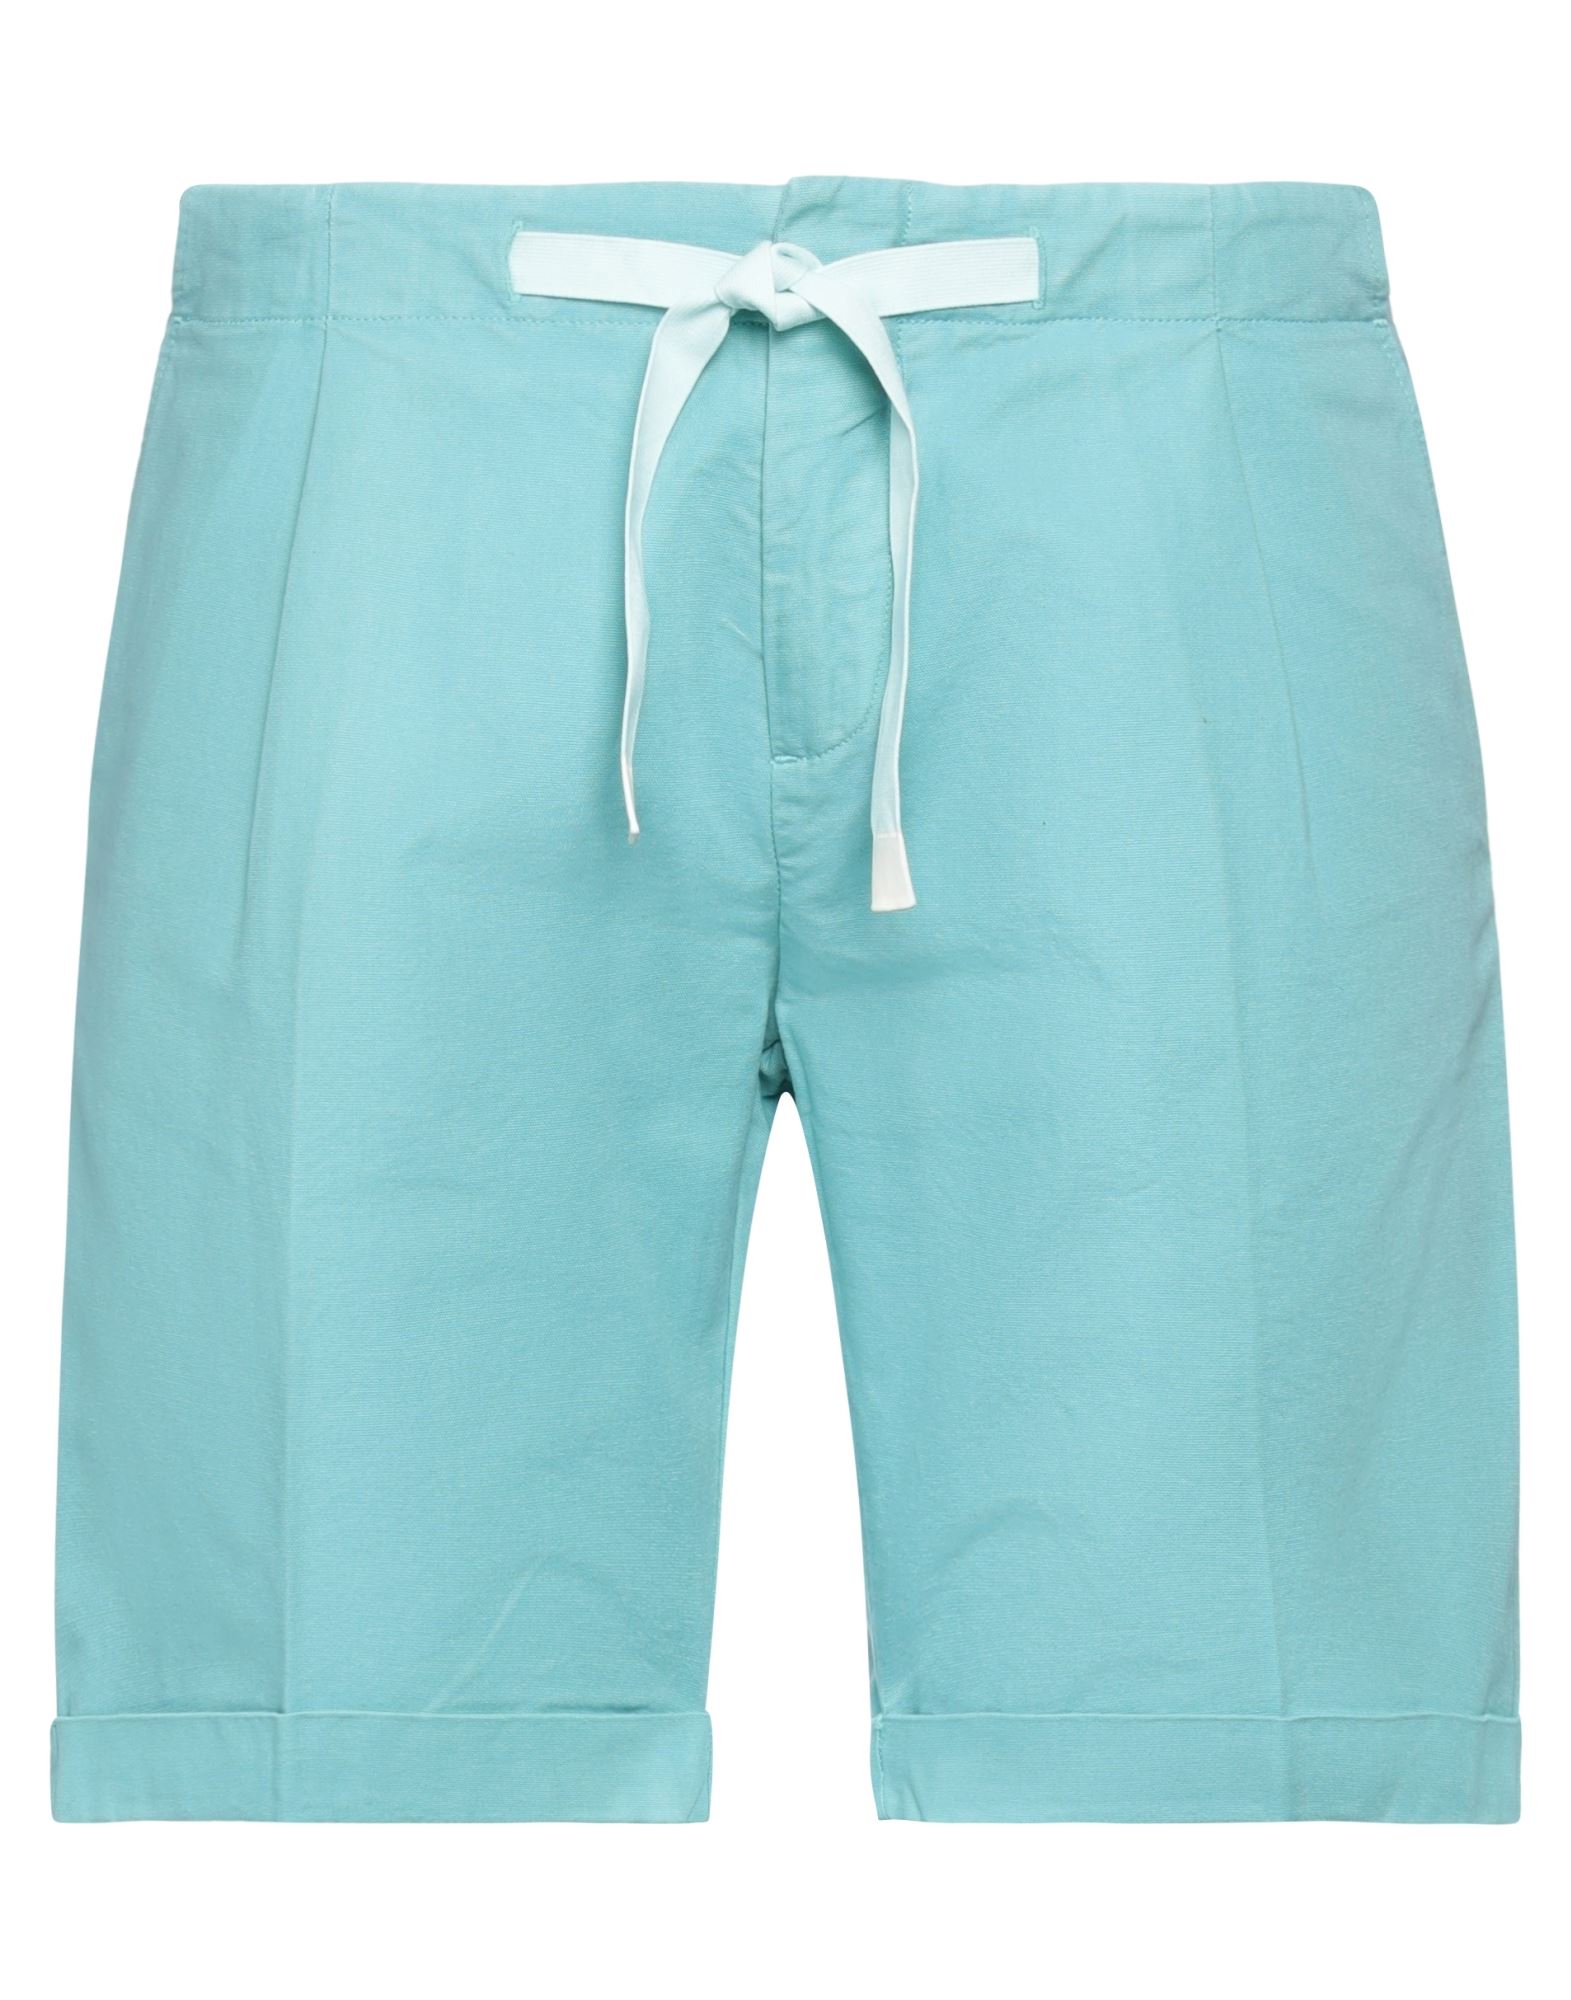 Entre Amis Man Shorts & Bermuda Shorts Turquoise Size 36 Cotton In Blue